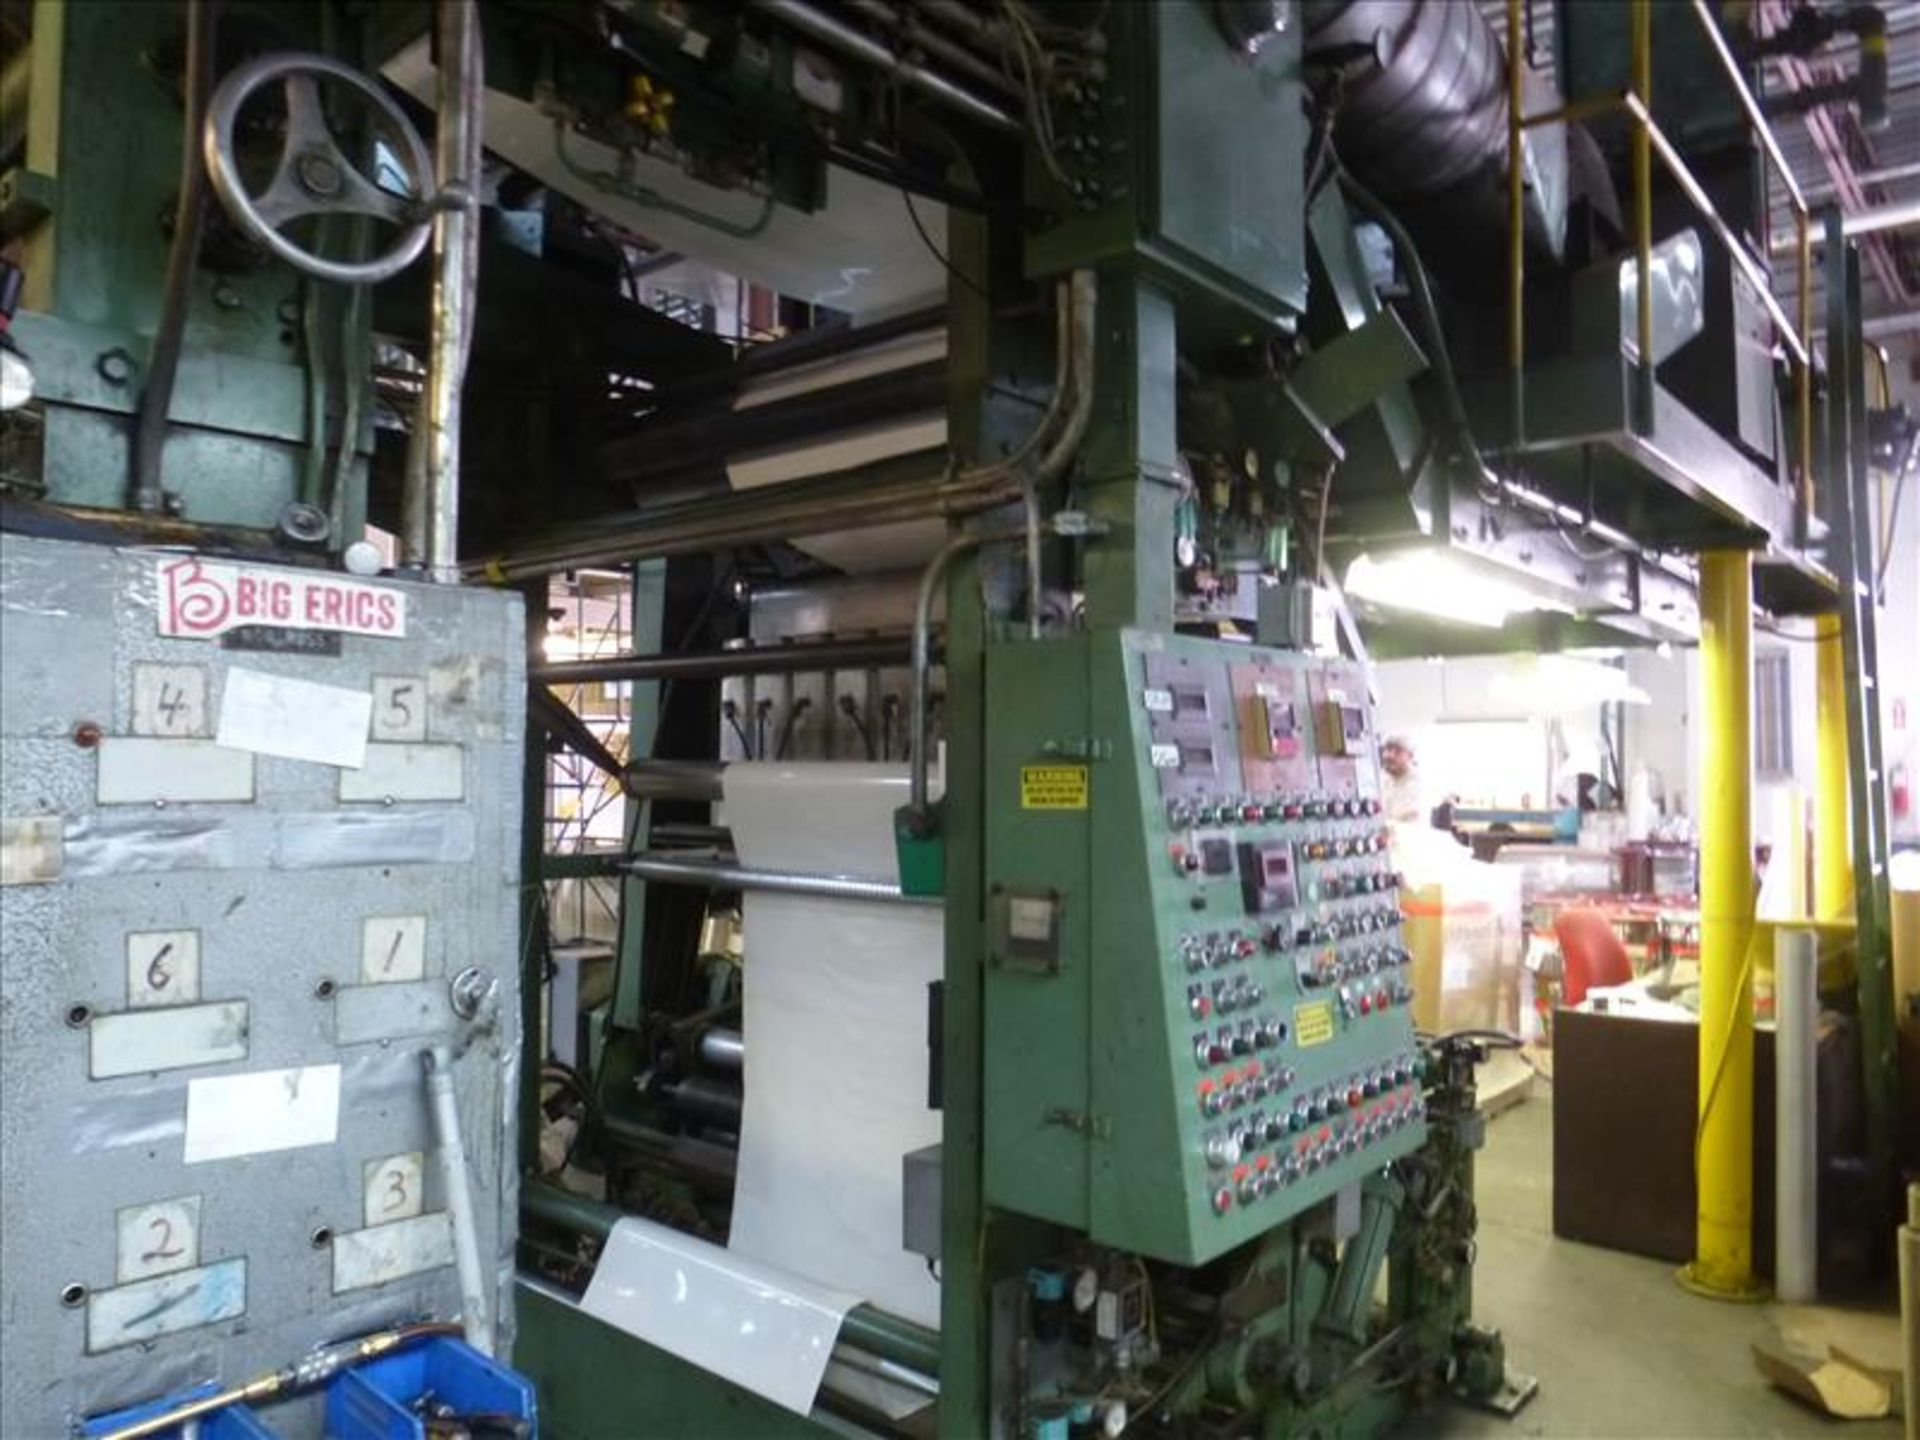 PCMC (Paper Converting Machine Co.) 6-colour central impression flexographic printing press, 56" - Image 7 of 30